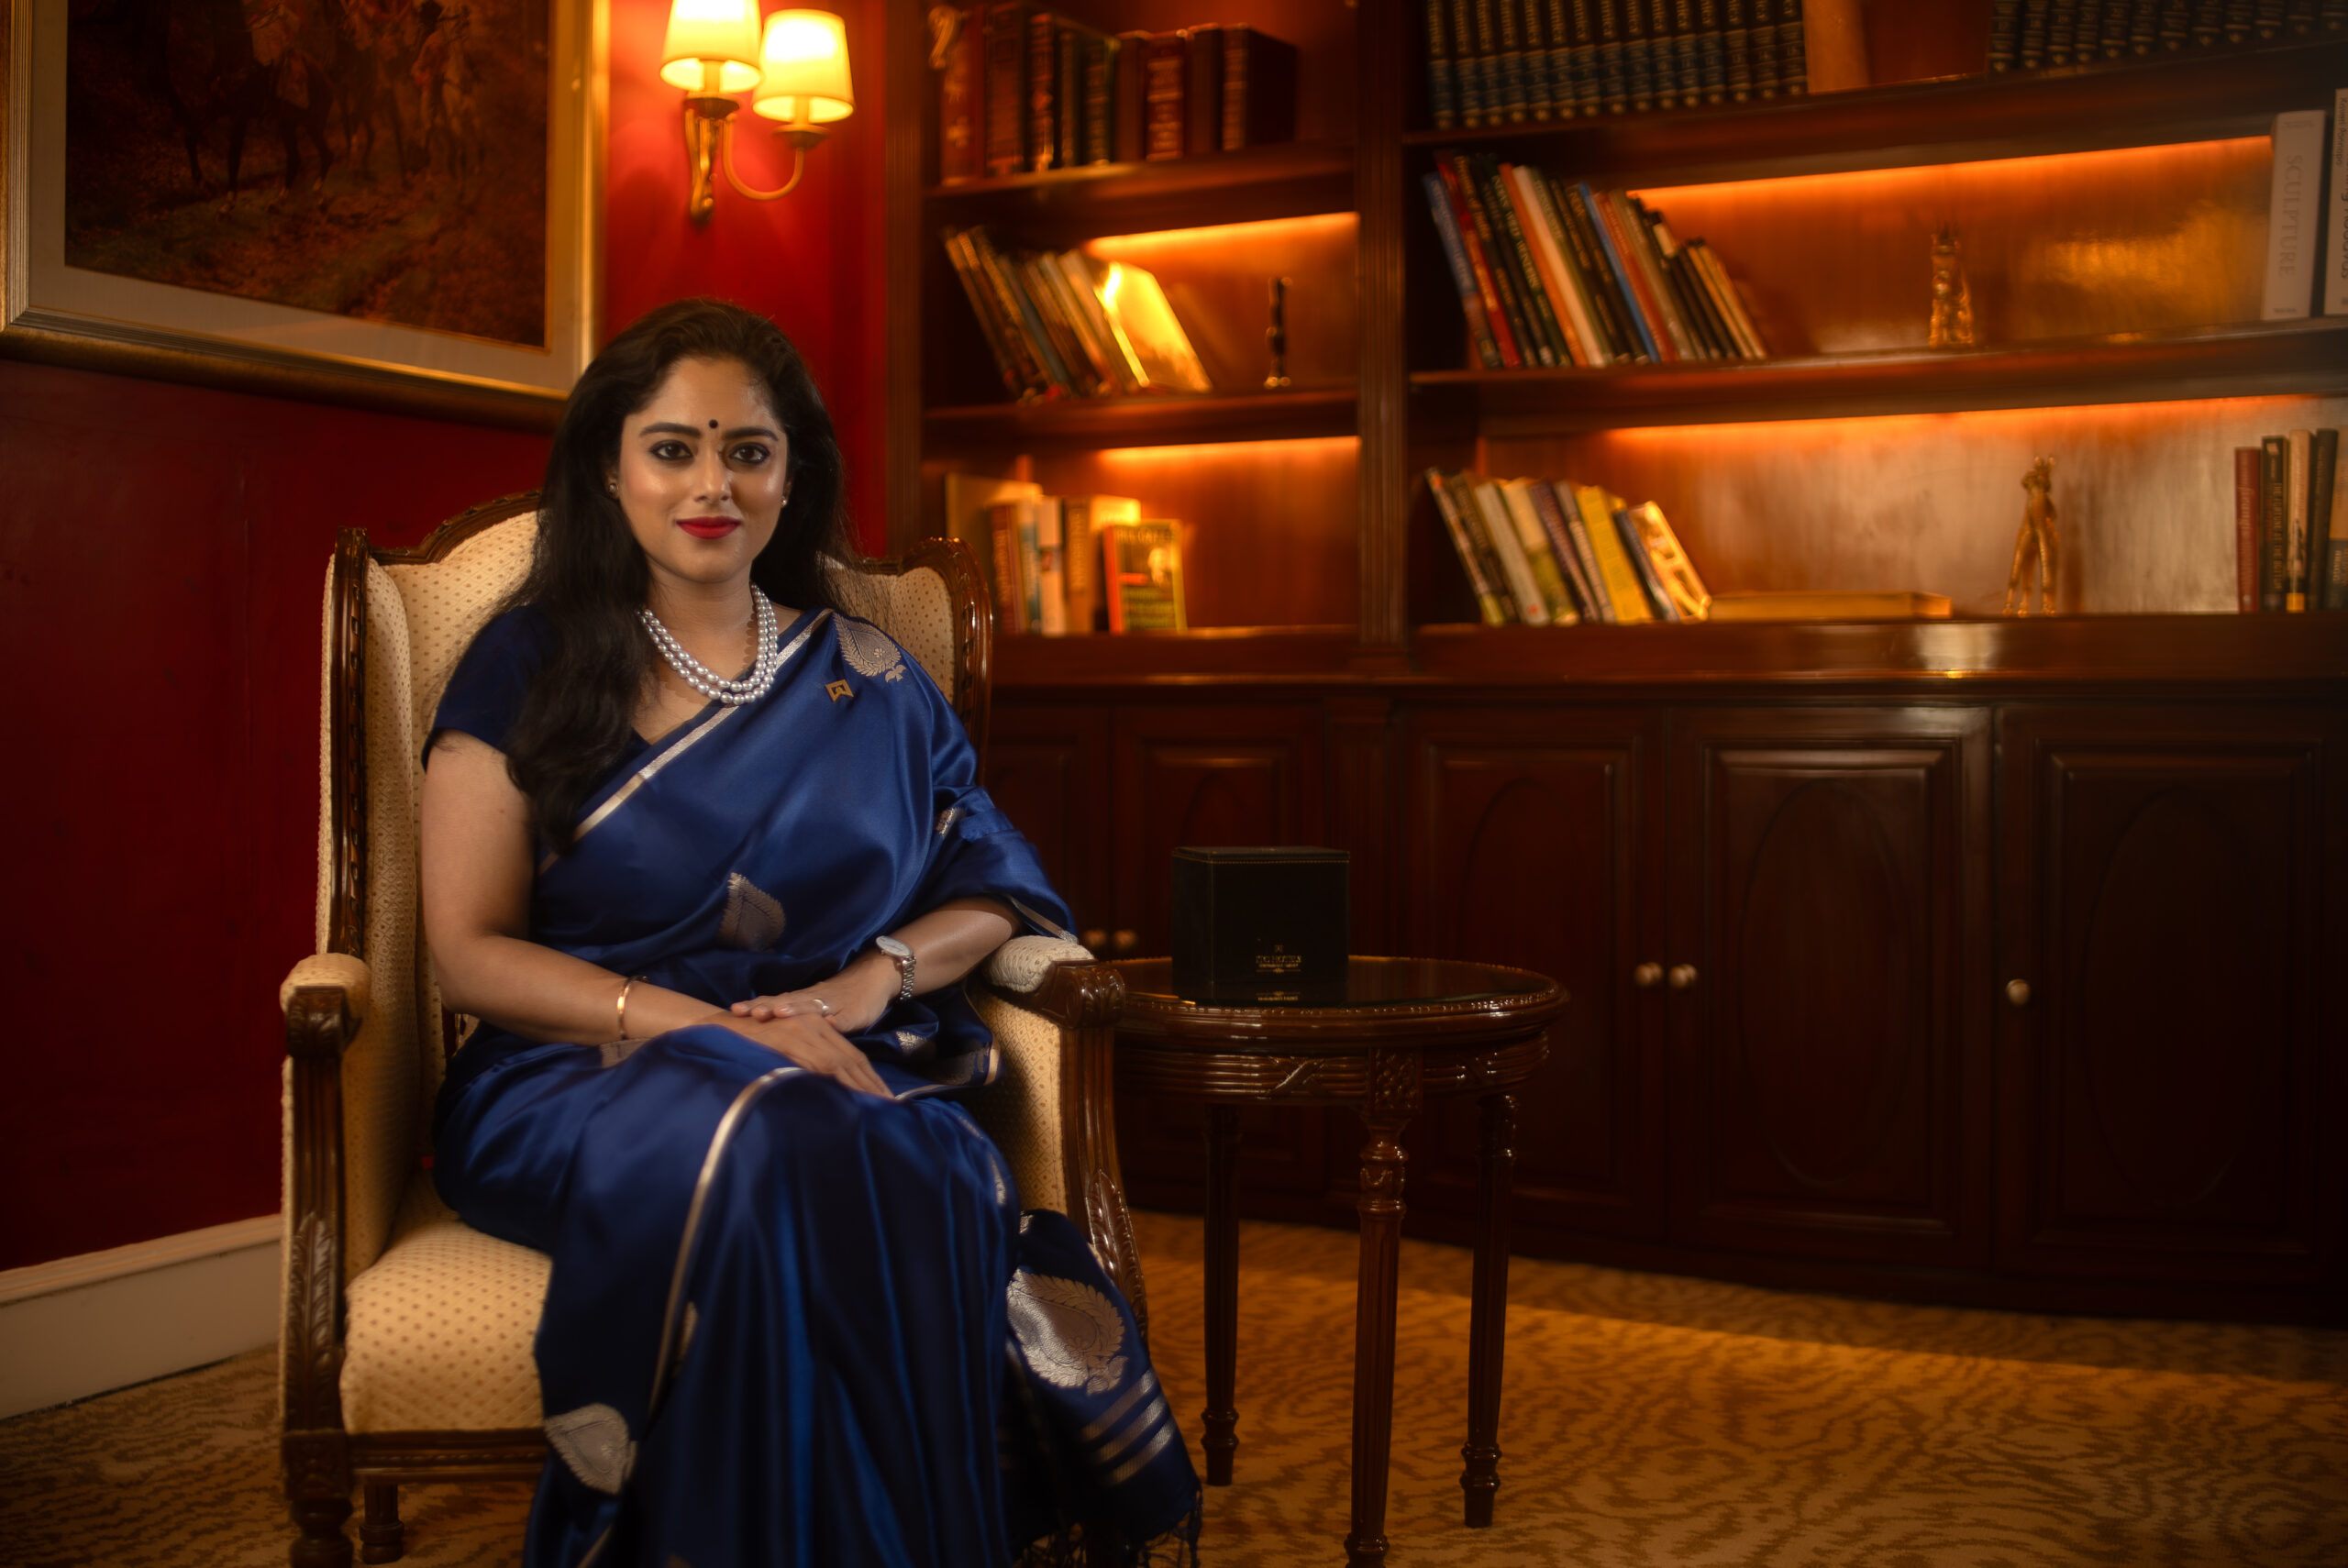 ITC Windsor Bengaluru appoints Sabrina Dey as its General Manager